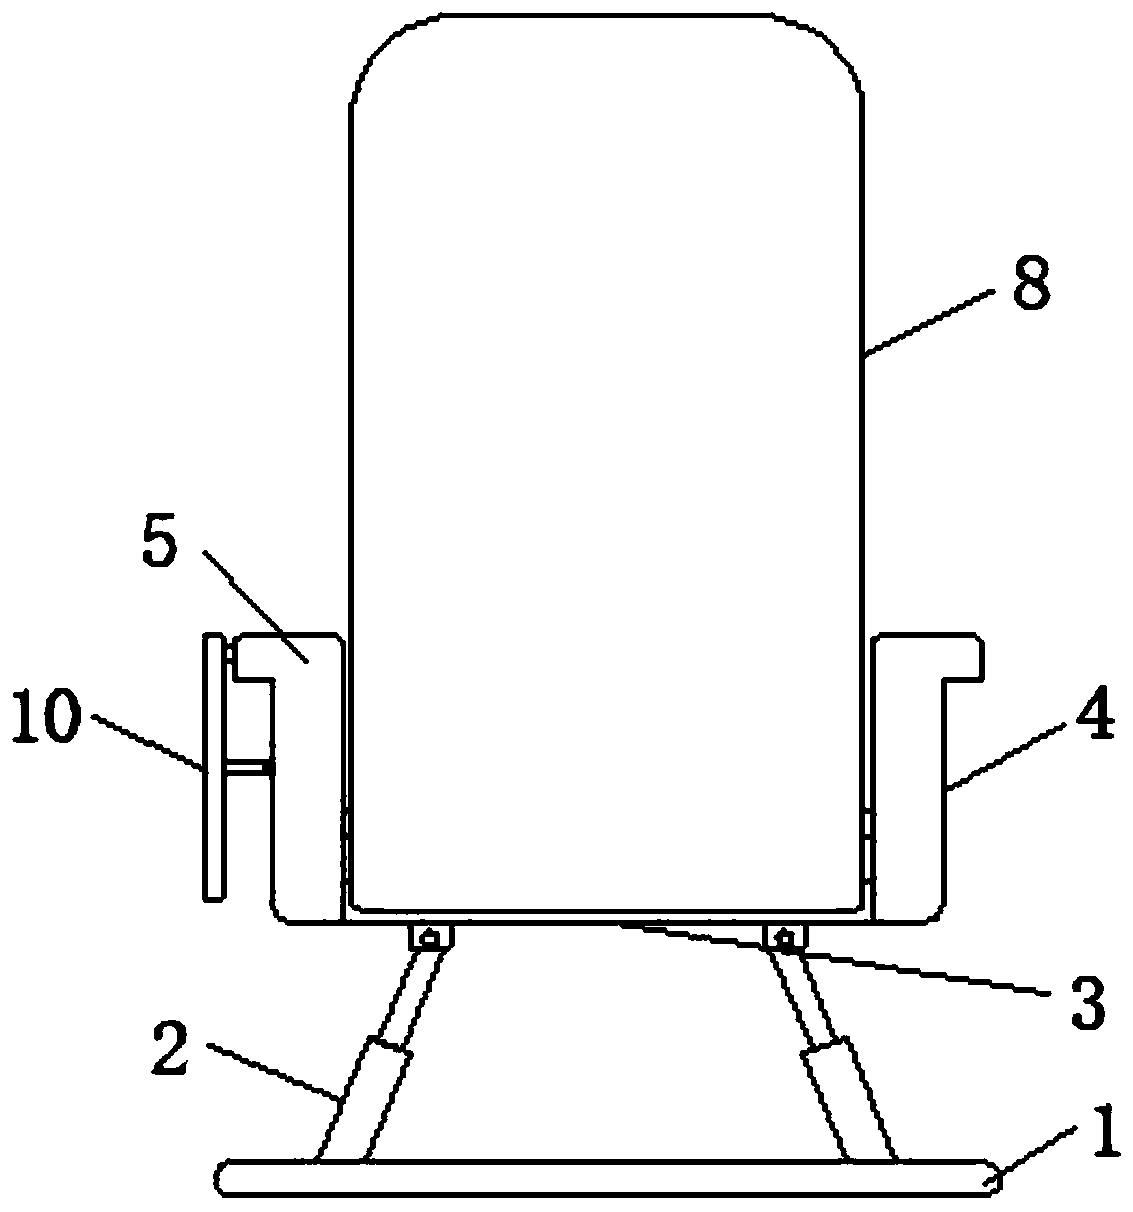 An adjusting device for an aircraft lumen adjusting chair